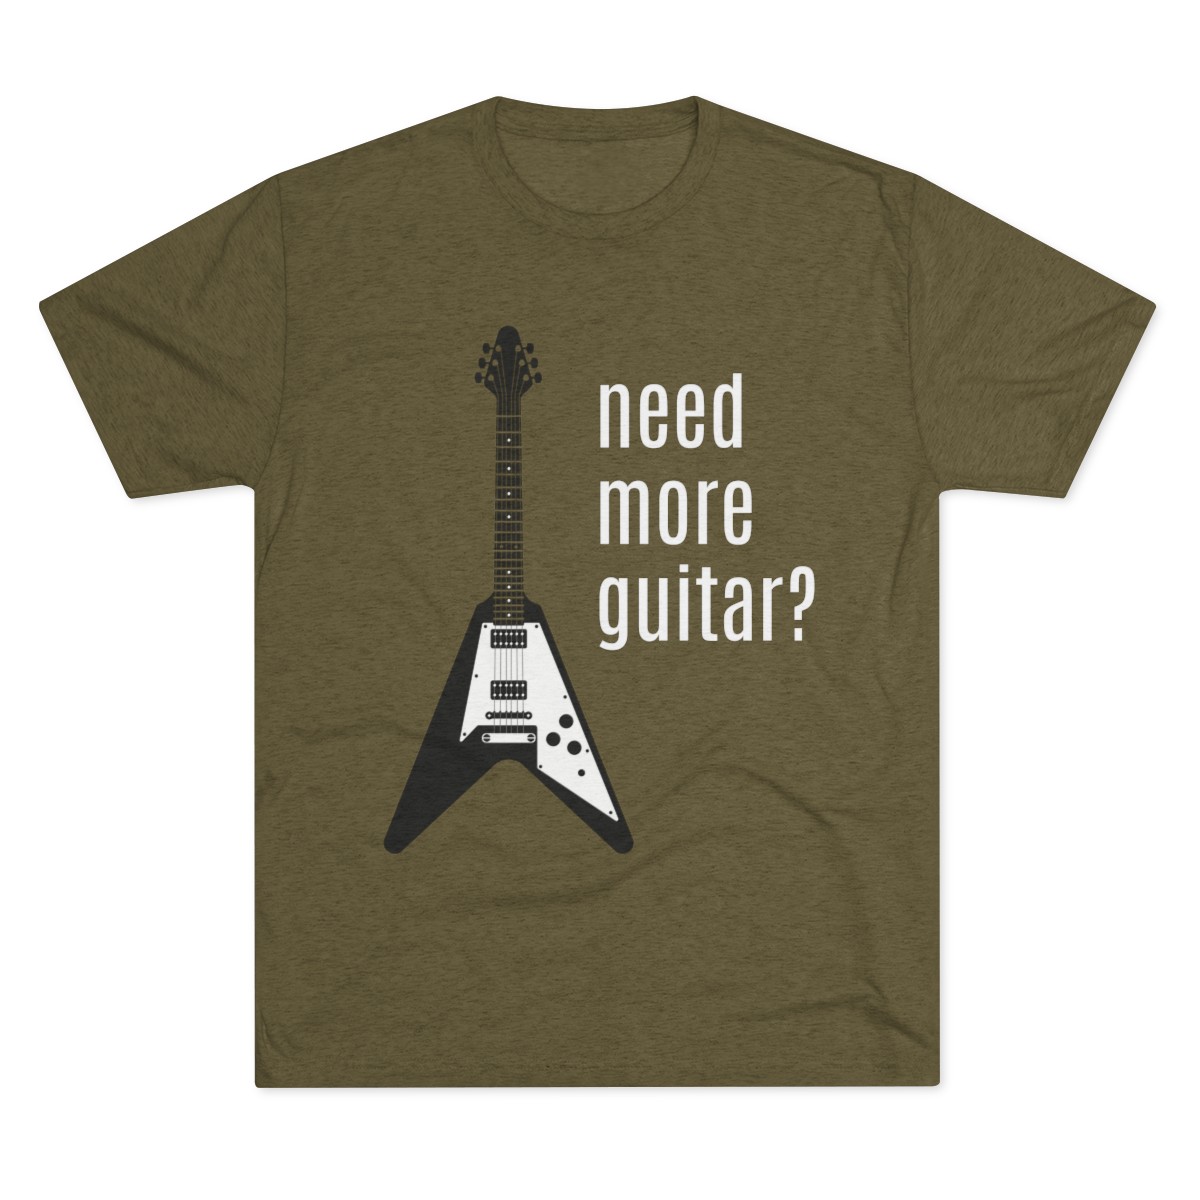 THE ZOO Tri-Blend Crew Tee "need more guitar?" product thumbnail image